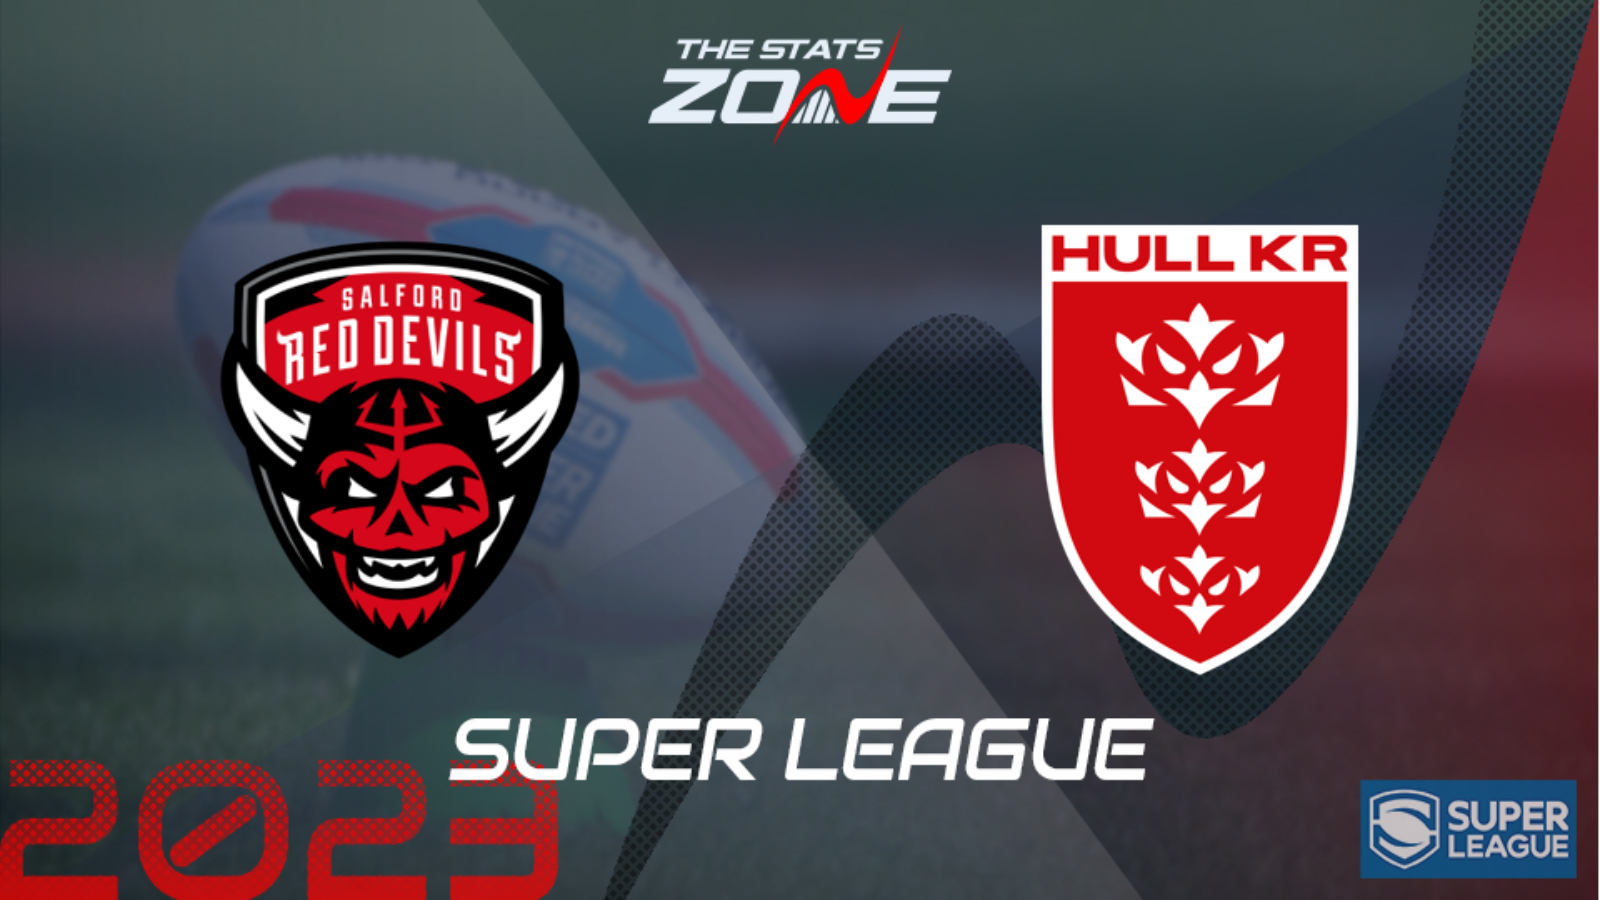 Salford Red Devils vs Hull KR – League Stage